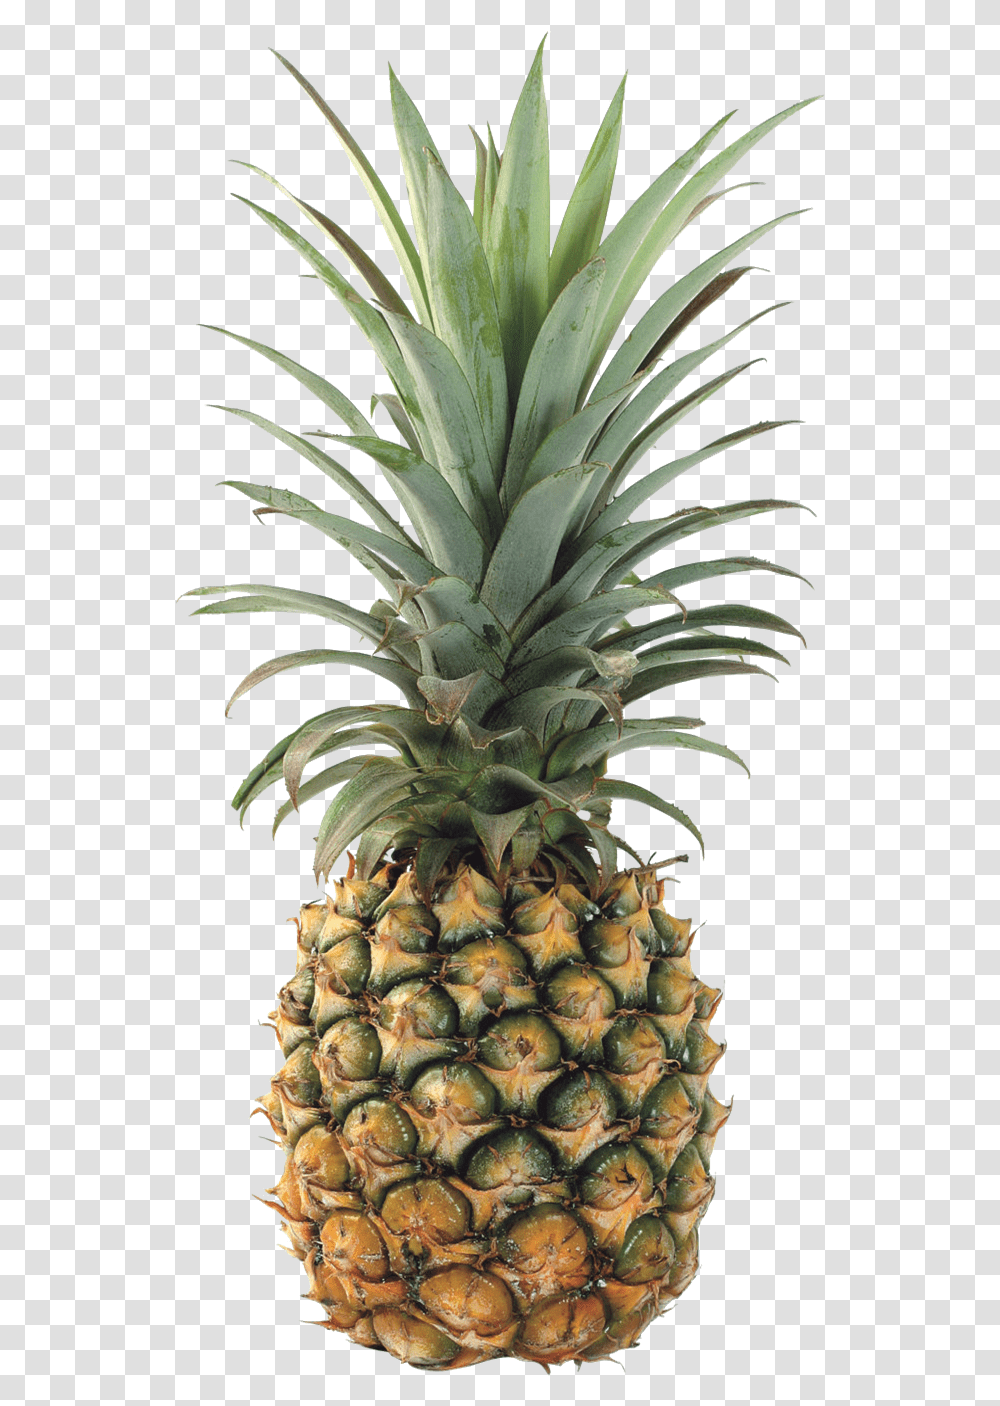 Pineapple Background Pineapple Background, Fruit, Plant, Food Transparent Png